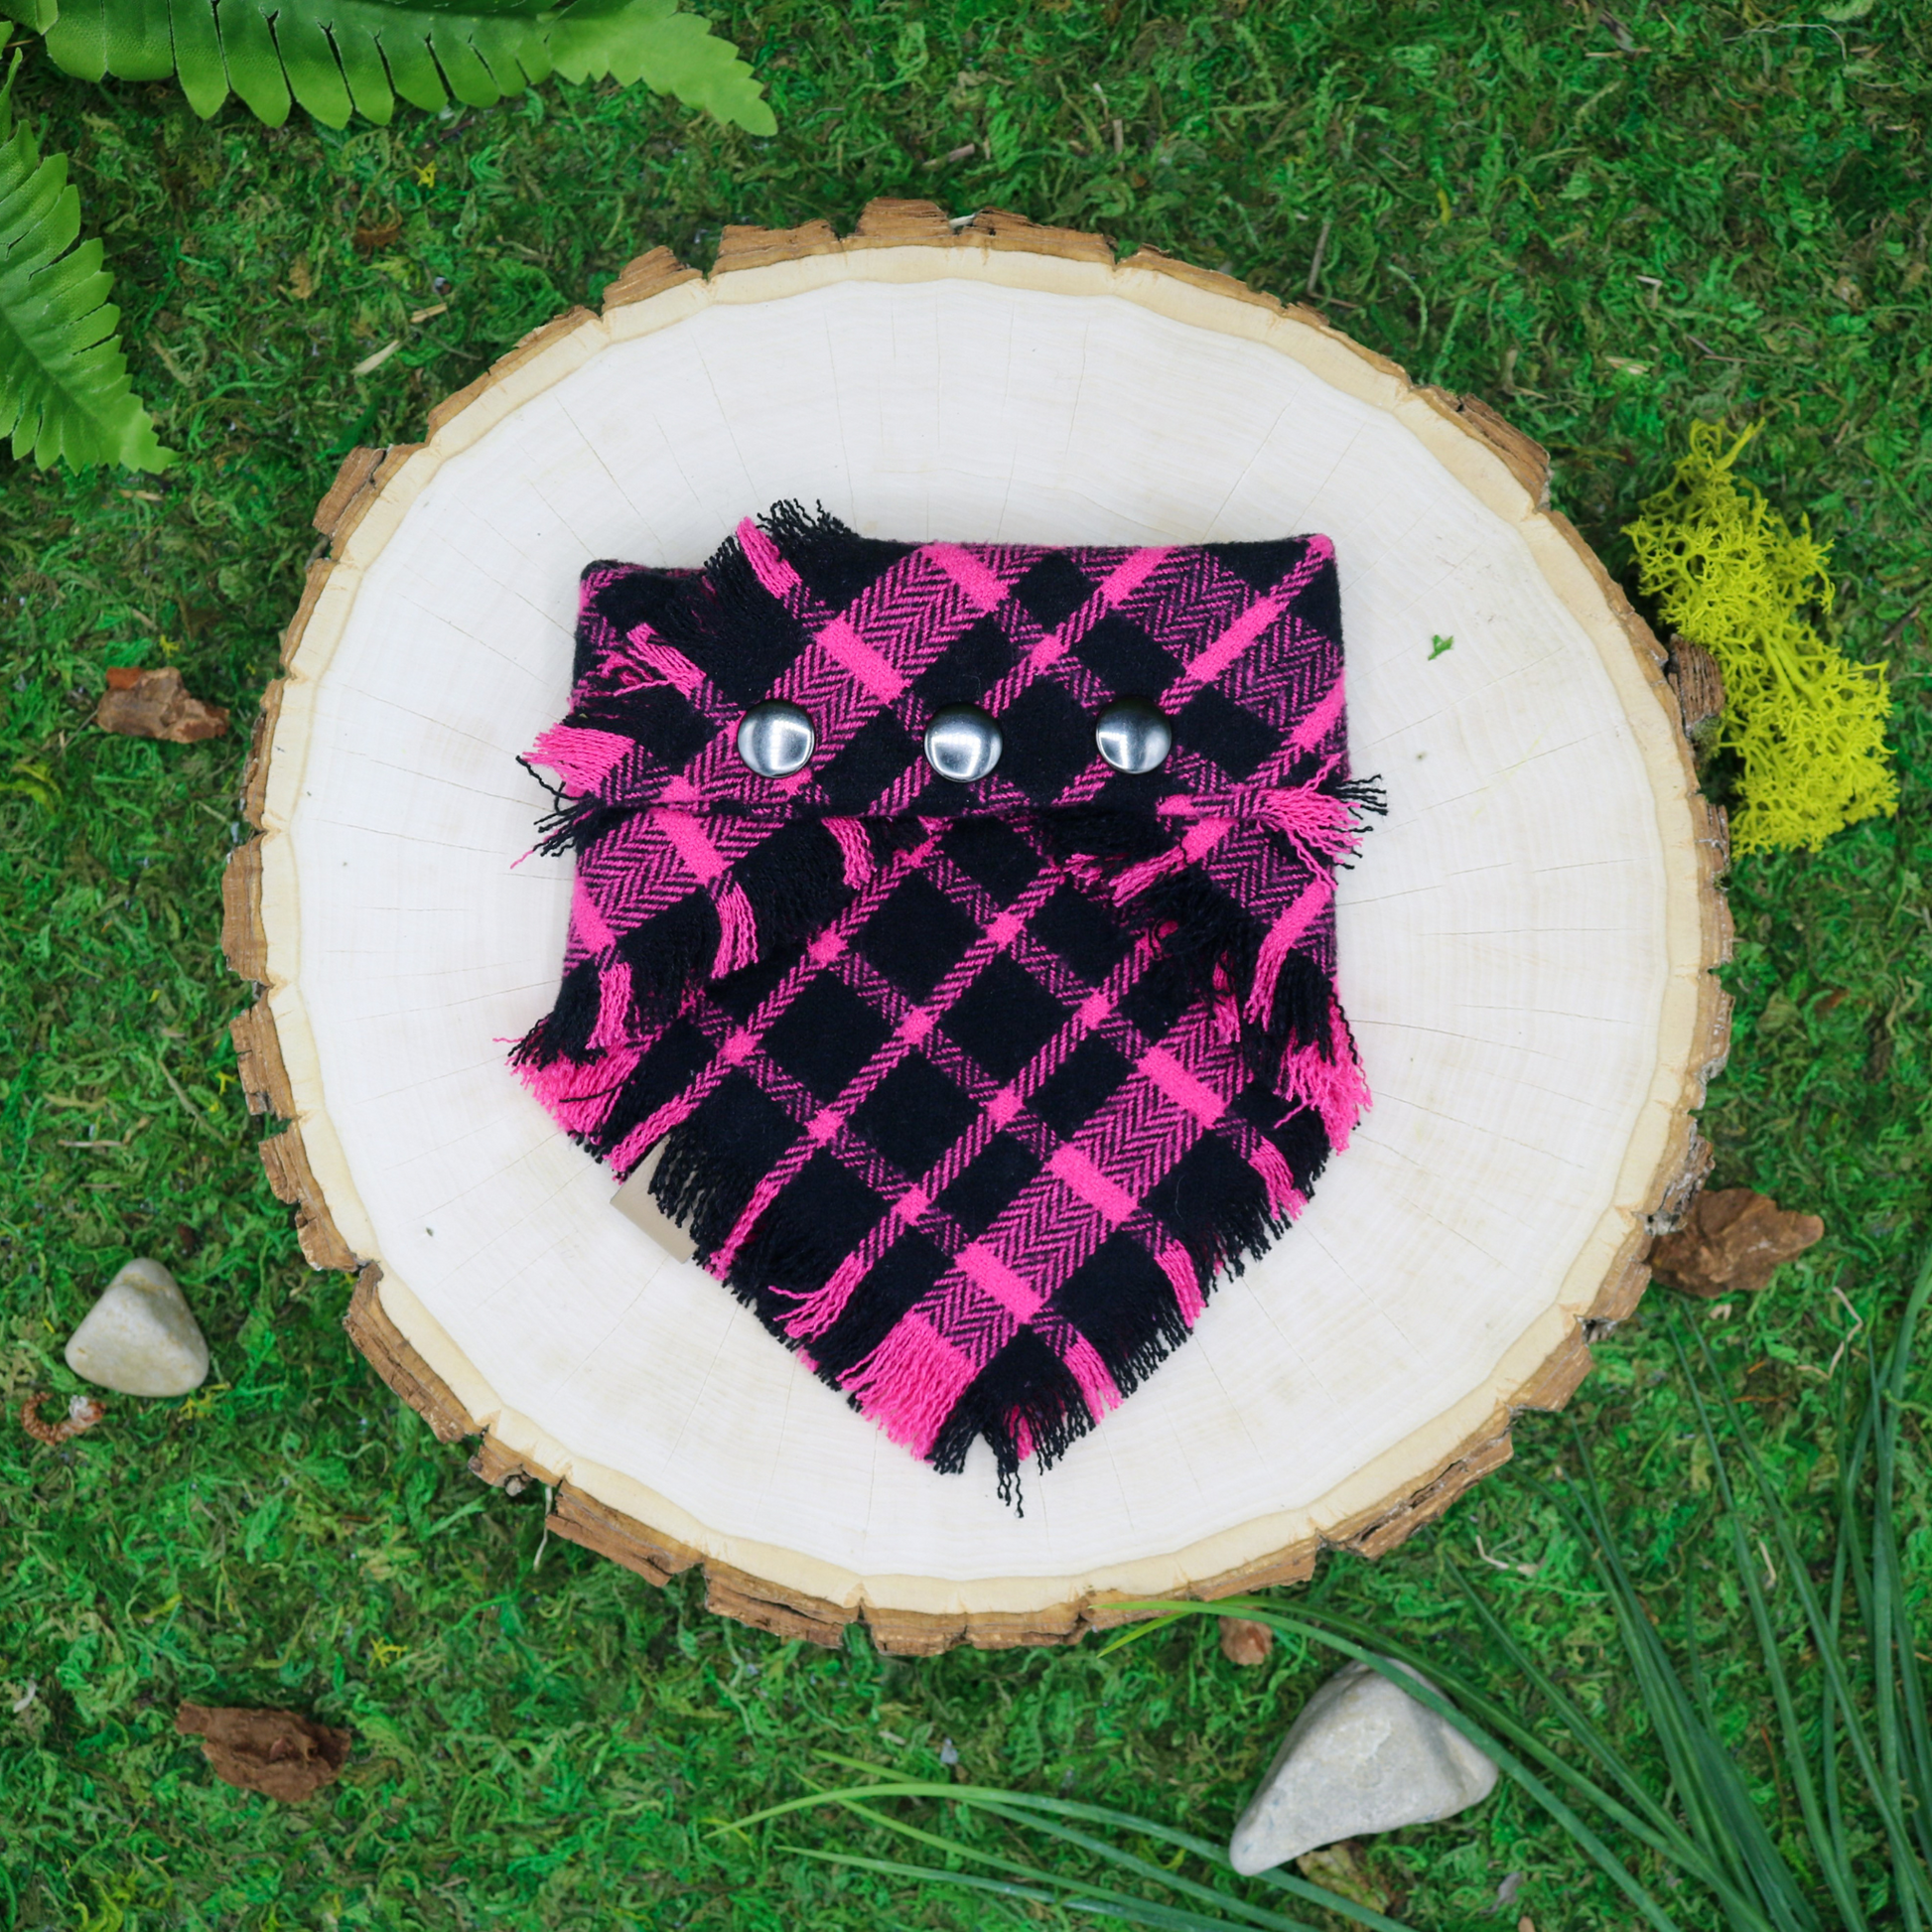 Snap on pet bandanas by The Luminous Pets, Pink and Black Plaid Frayed Flannel